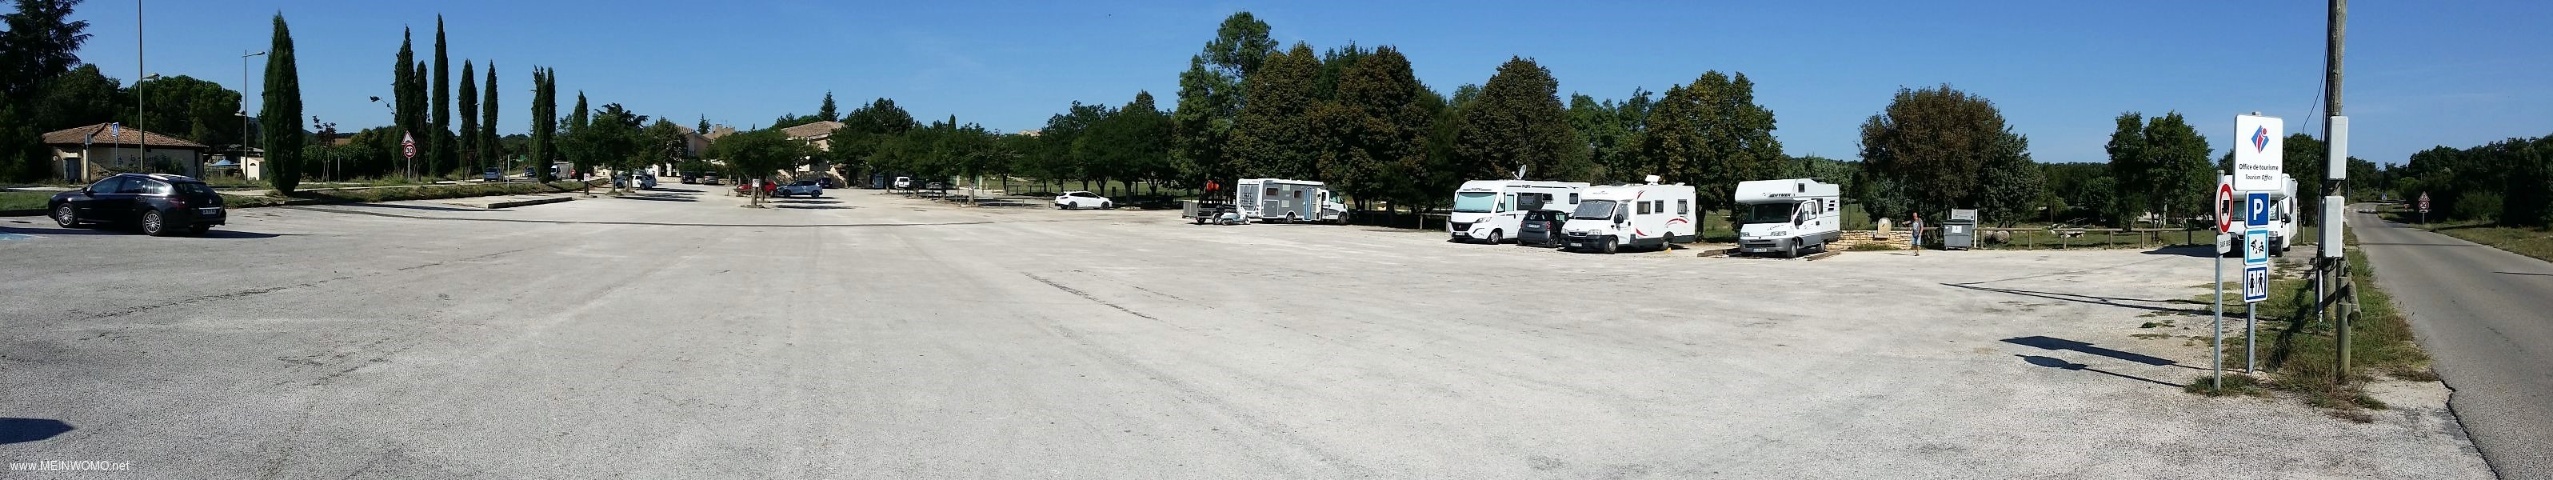  There is no parking space for motorhomes in the rear parking lot.